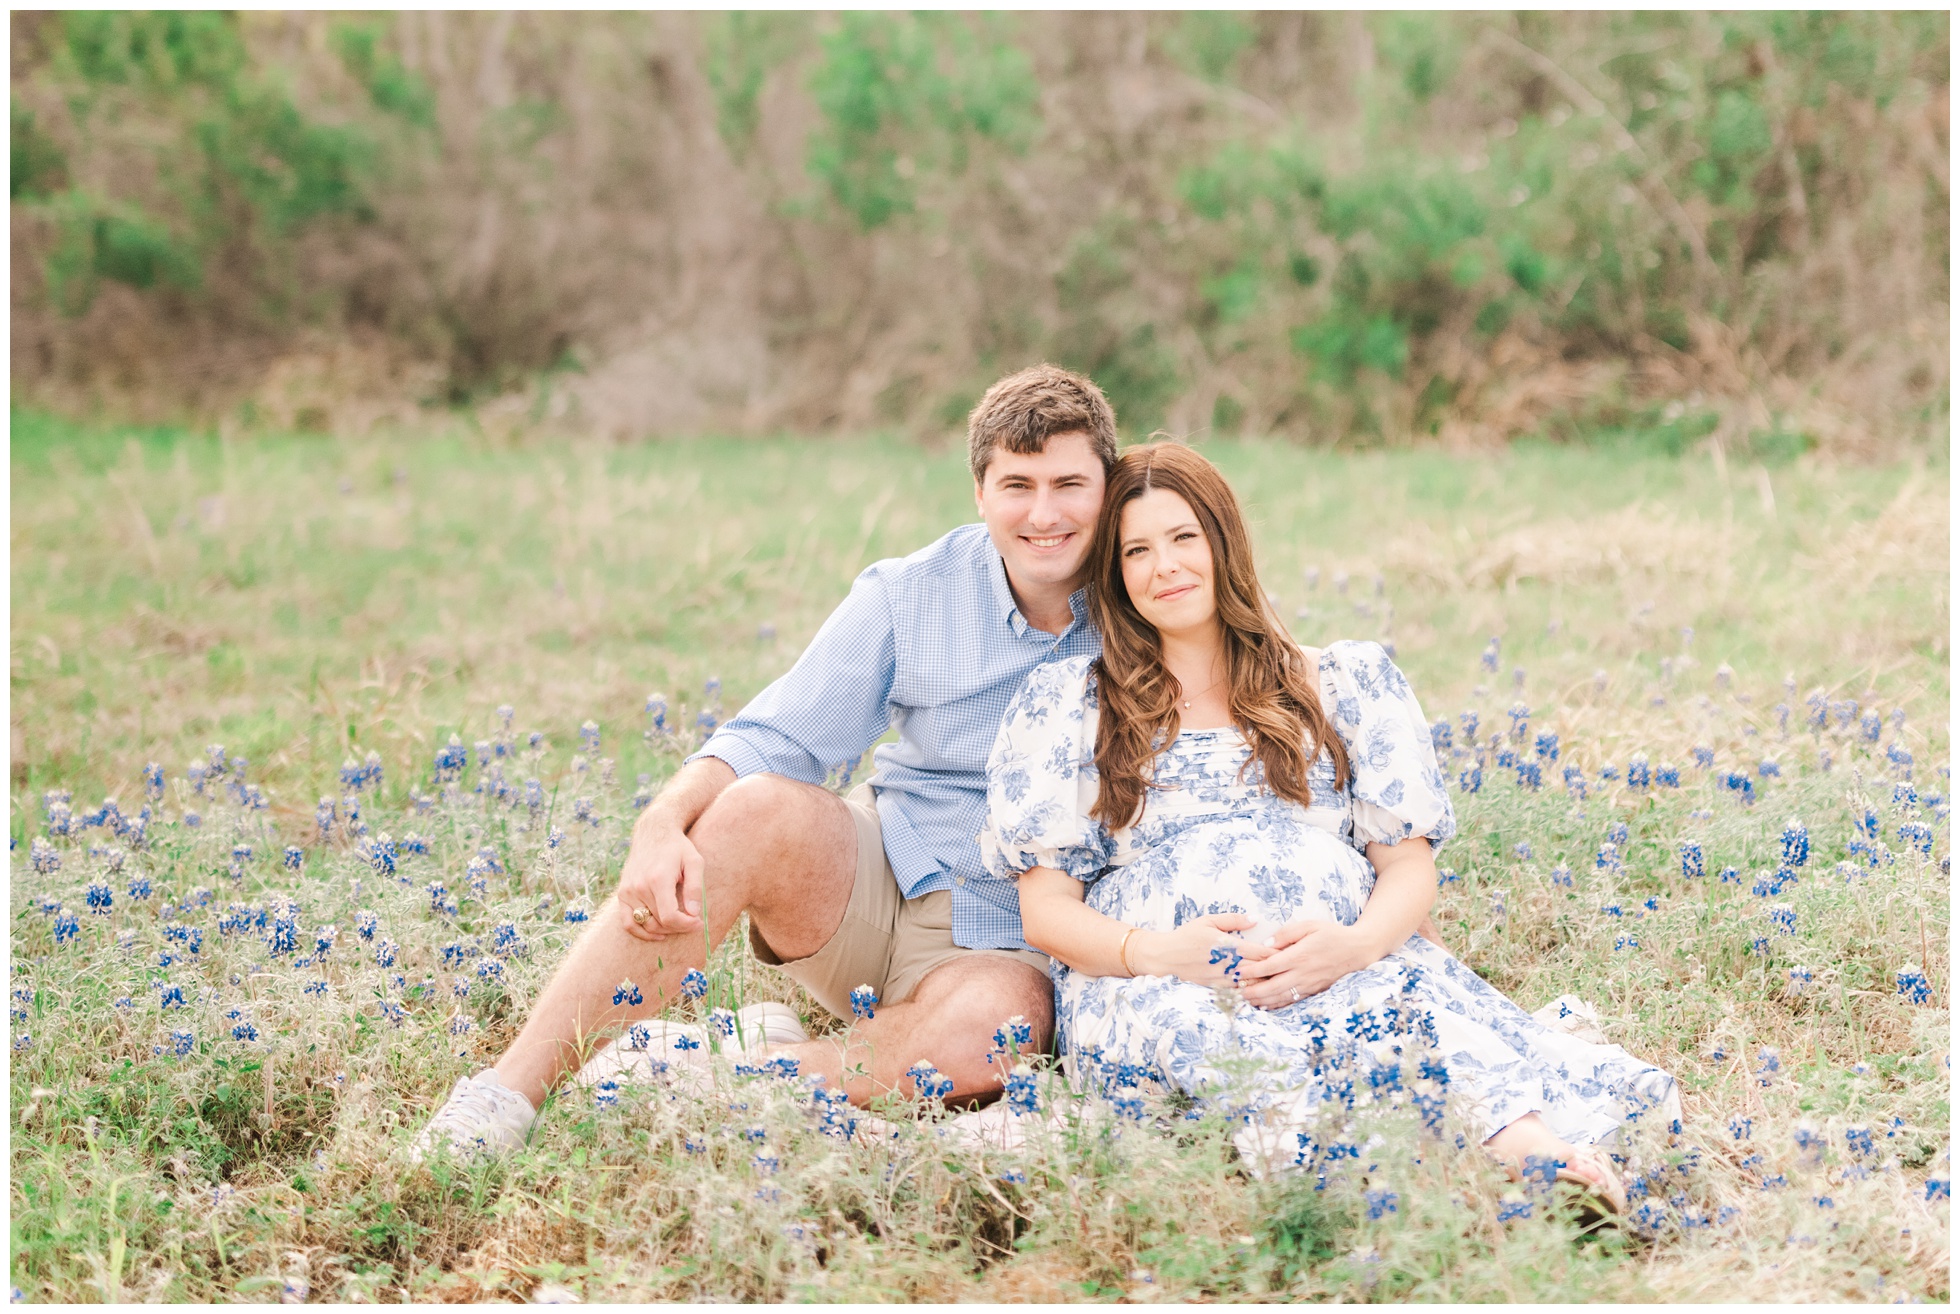 Maternity photography in bluebonnet patch near The Woodlands, Texas.